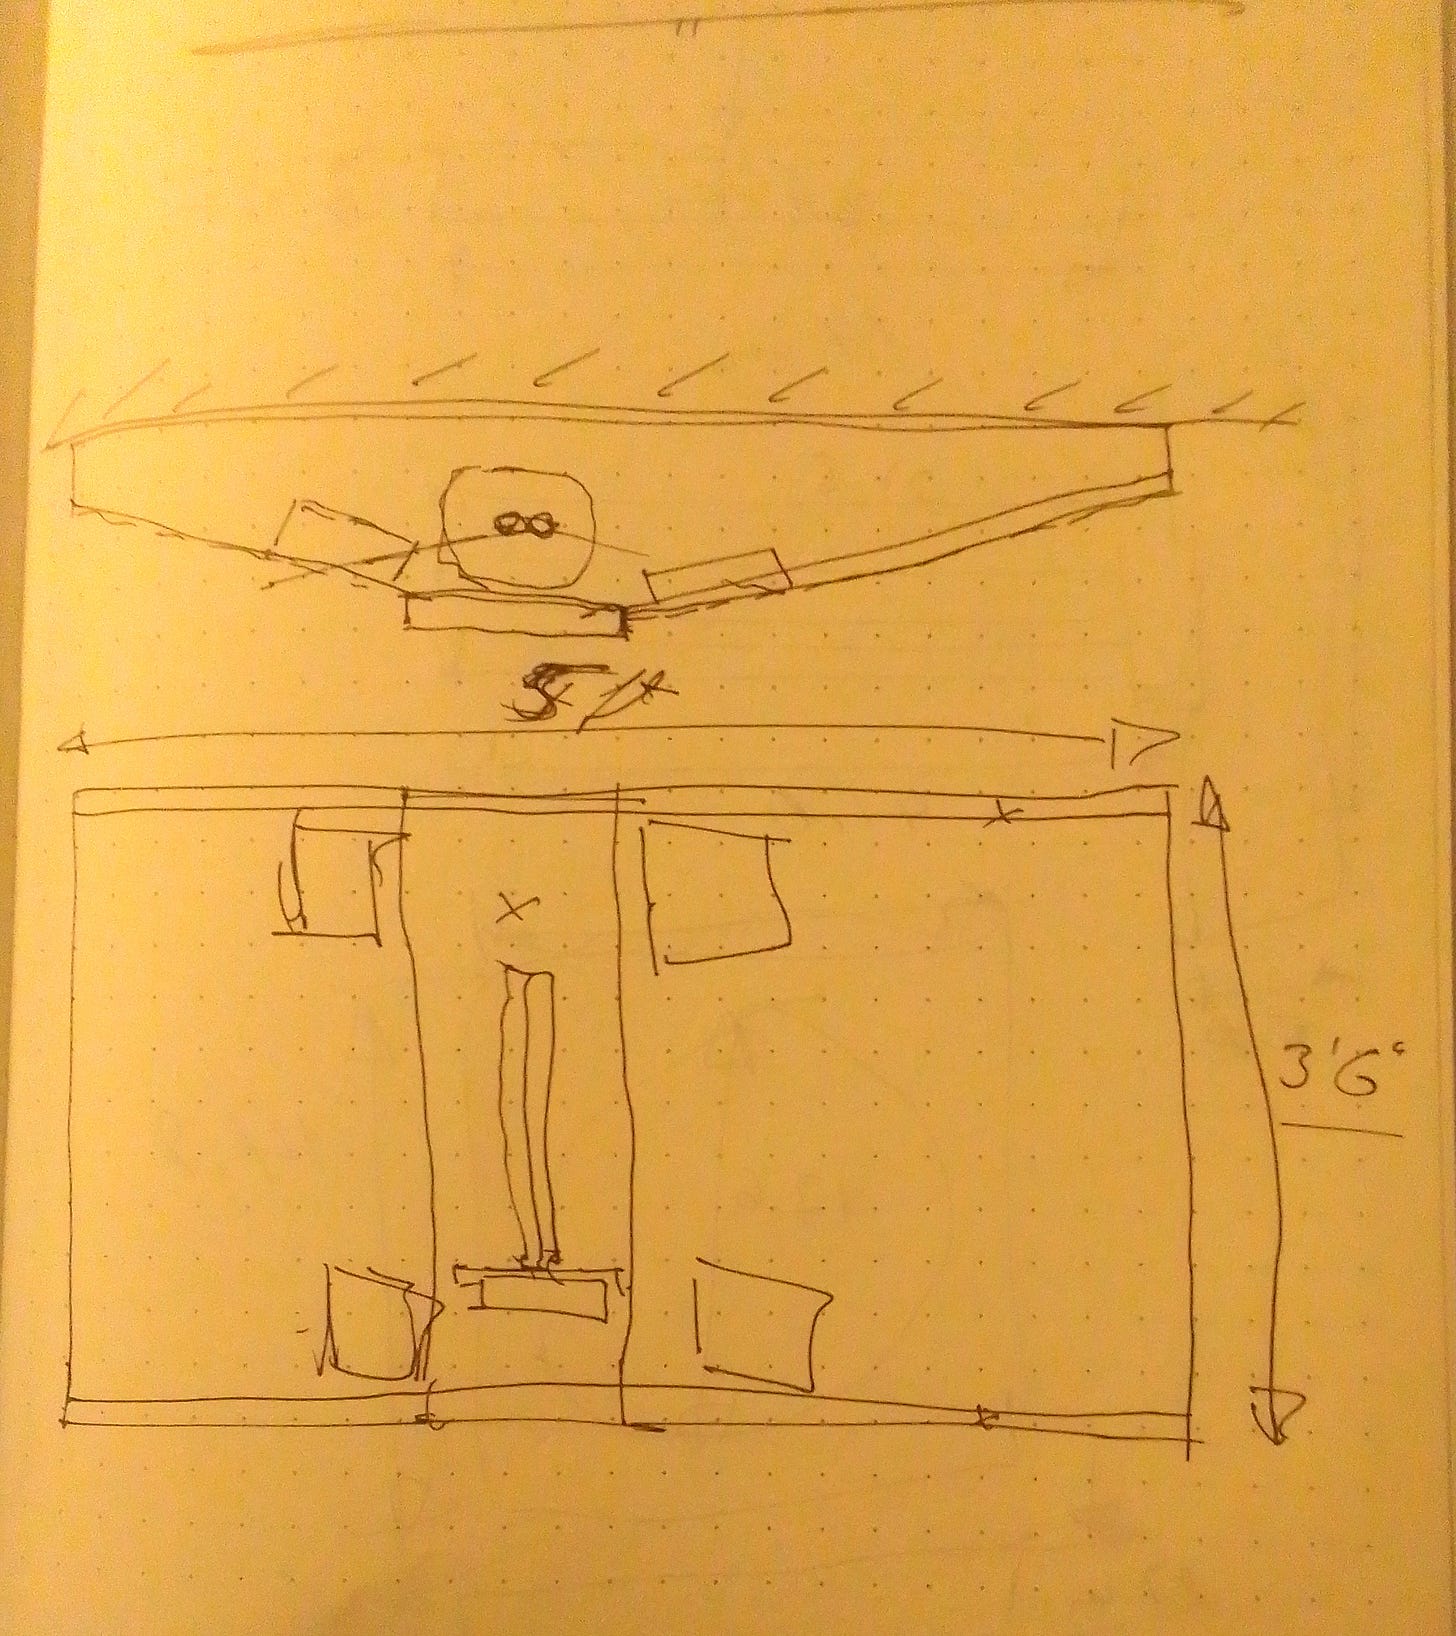 Rough scetch of upper-room UV fixture showing UV light in upward-angled duct against ceiling